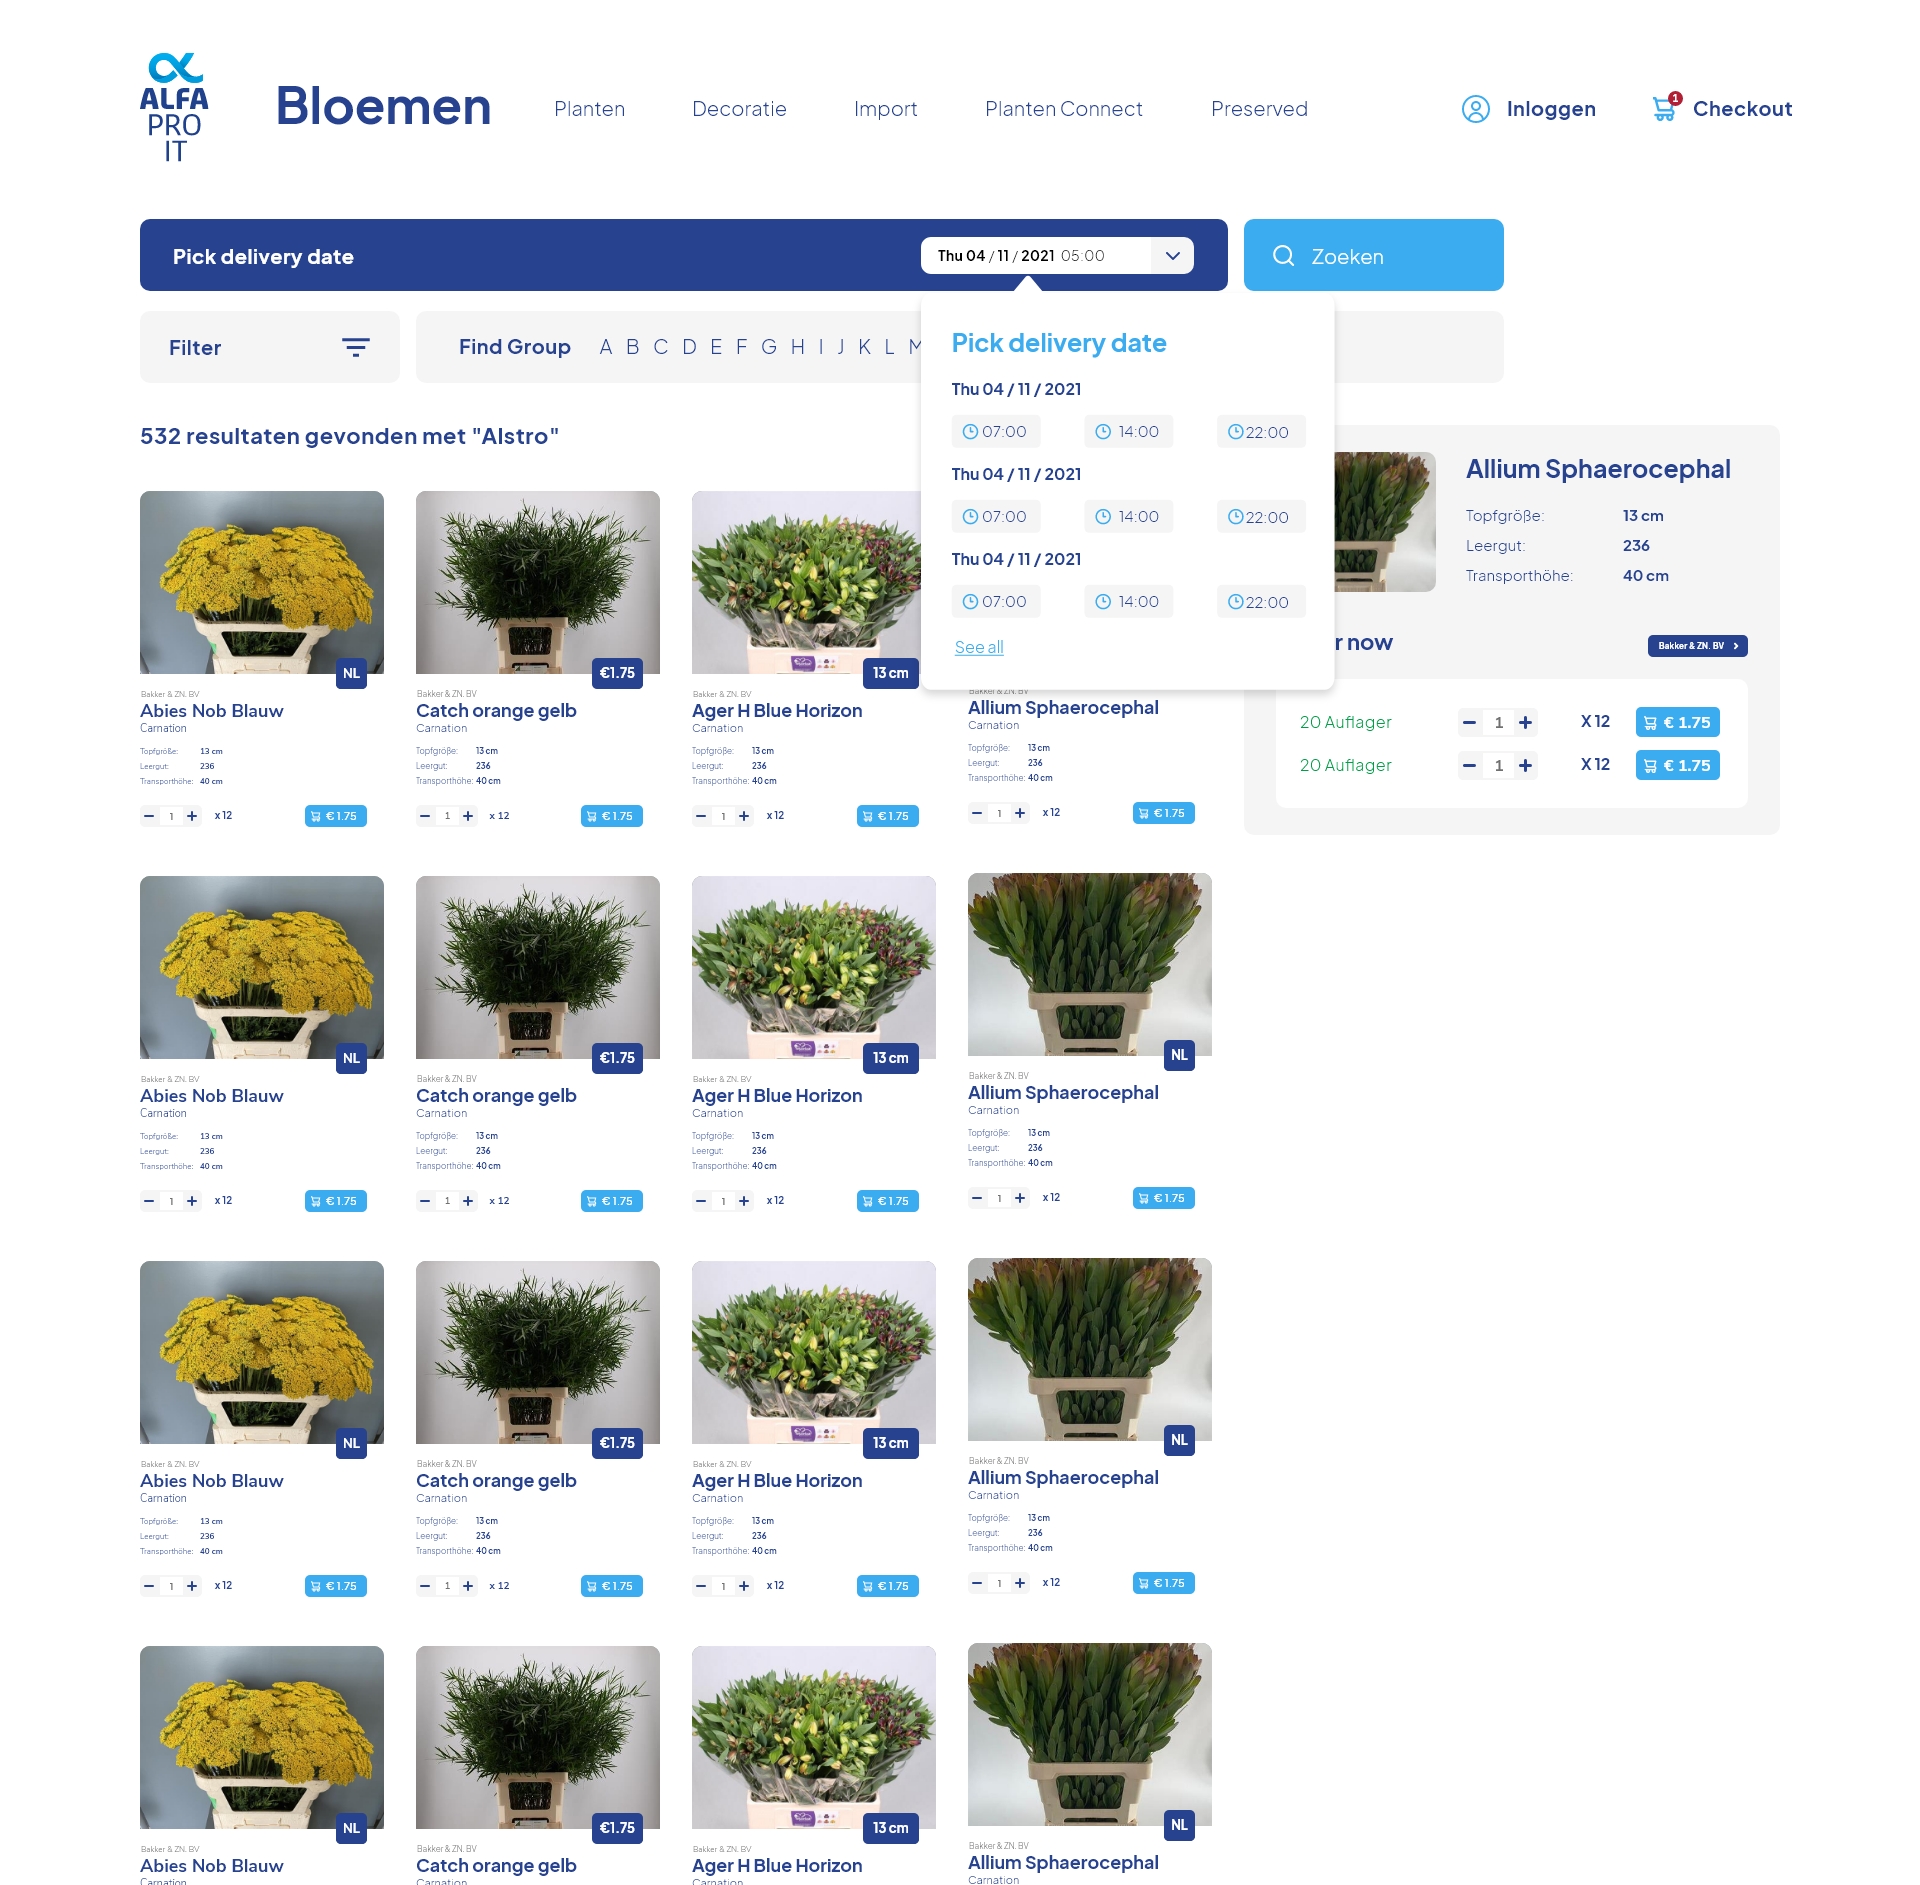 Online flower shop interface displaying various bouquets of yellow and green flowers with price tags and options to choose delivery date.